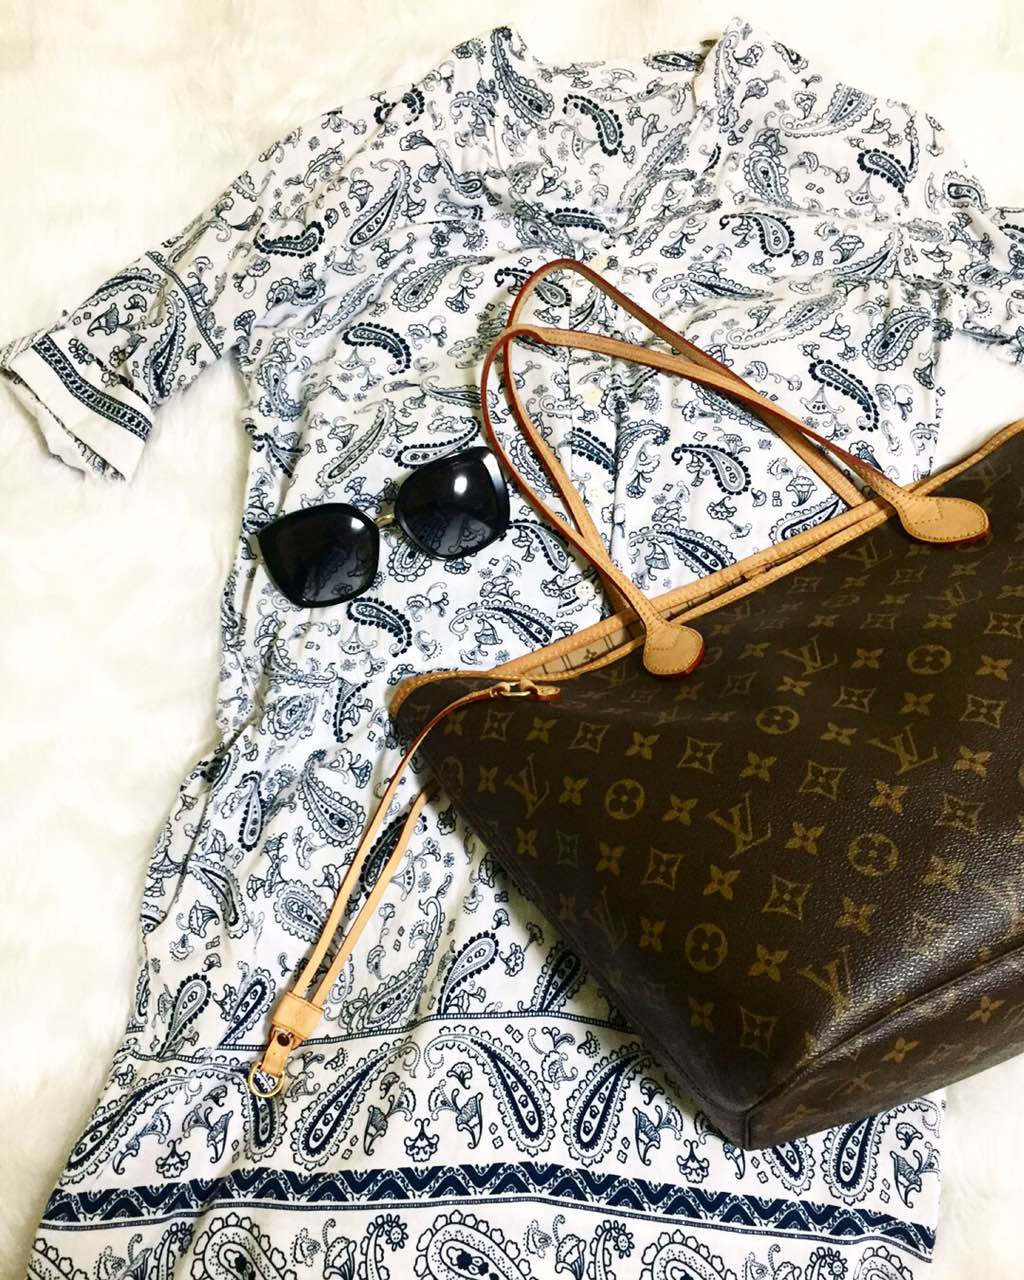 Louis Vuitton Favorite MM Damier Ebene with Clemence wallet and Cles.   Louis vuitton handbags black, Louis vuitton handbags prices, Louis vuitton  favorite mm